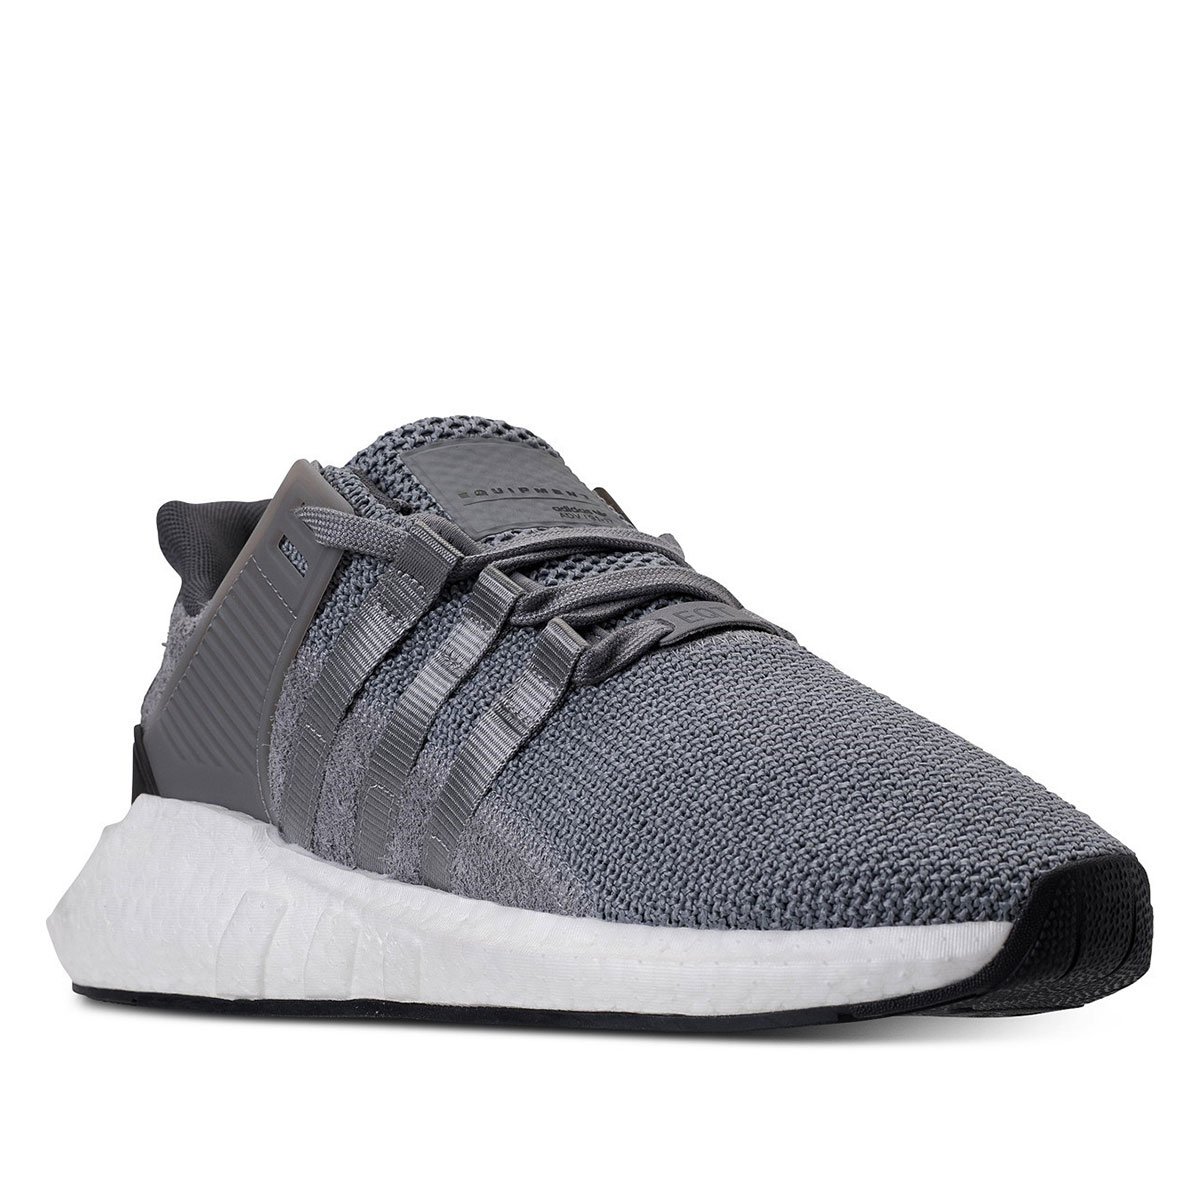 adidas EQT Support 93/17 Boost  BY9511